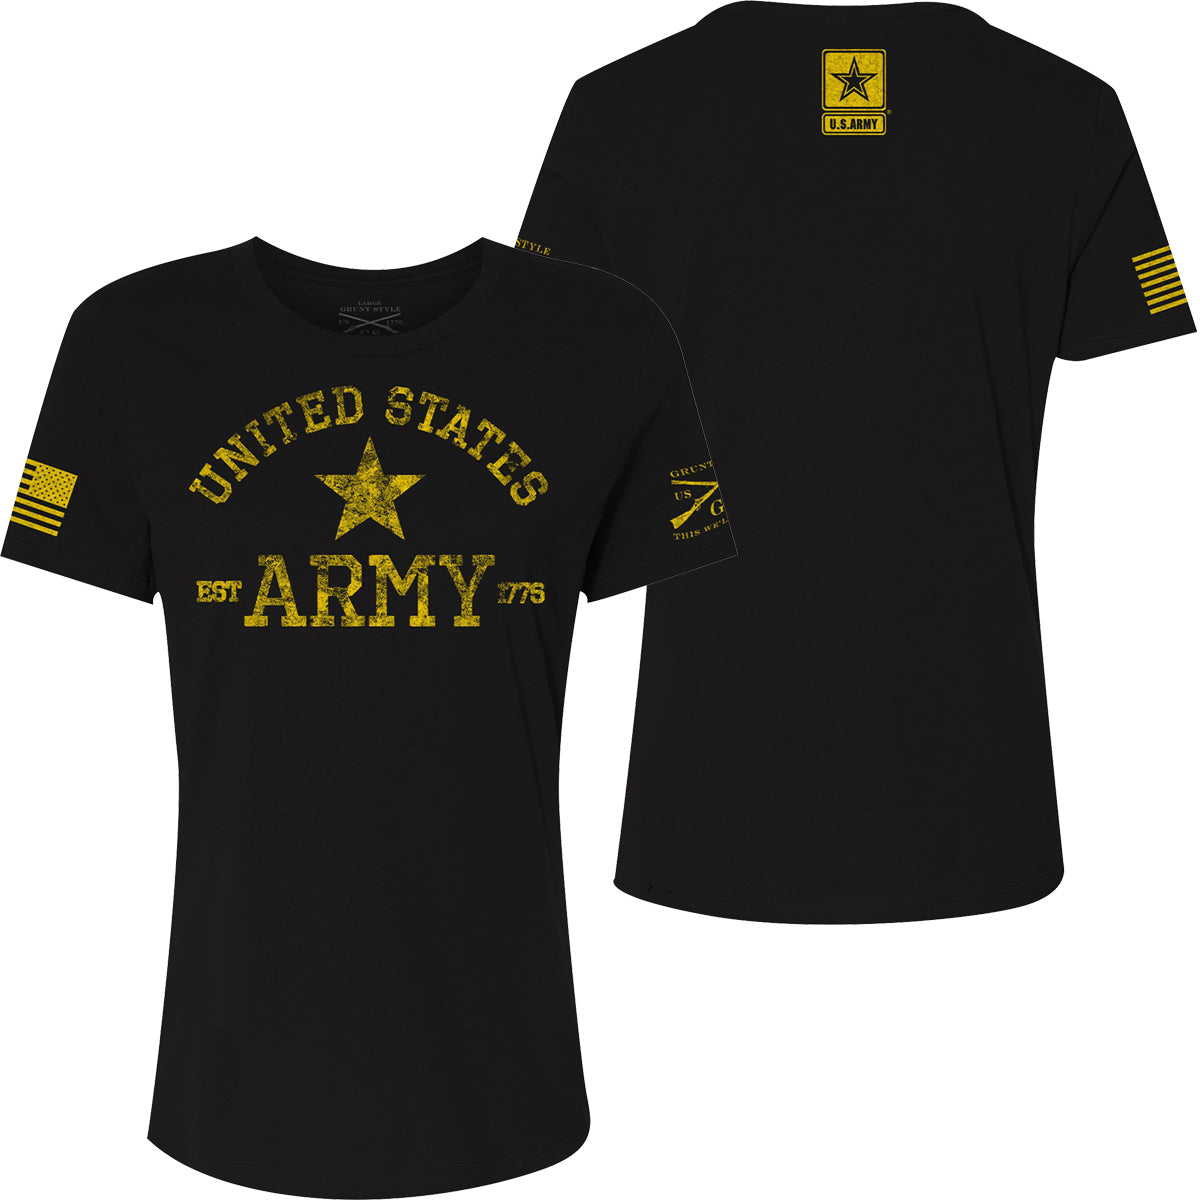 Grunt Style Women's Army - Est. 1775 Relaxed Fit T-Shirt - Black Grunt Style